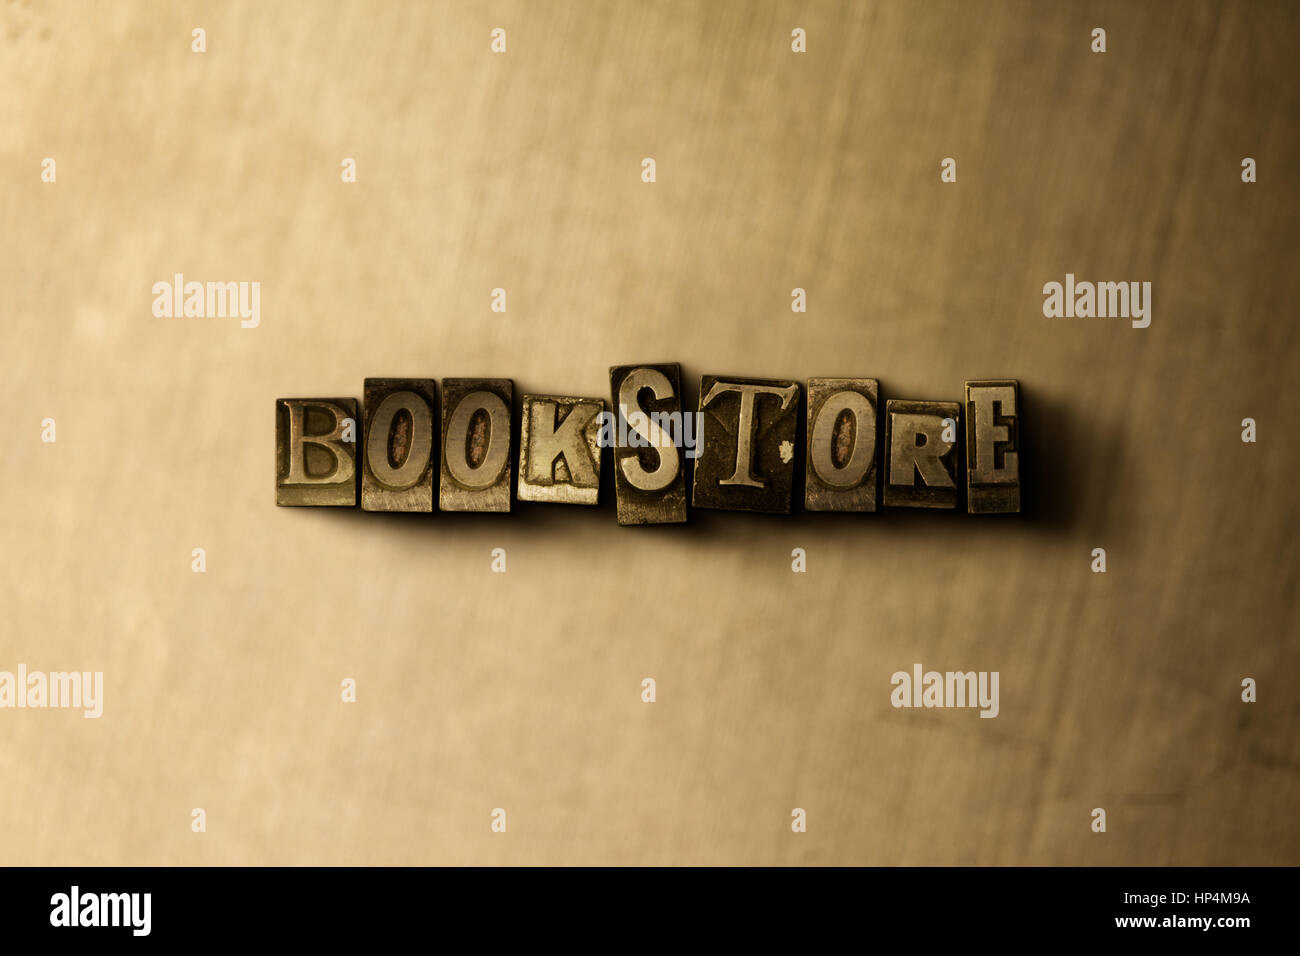 BOOKSTORE - close-up of grungy vintage typeset word on metal backdrop. Royalty free stock illustration.  Can be used for online banner ads and direct  Stock Photo